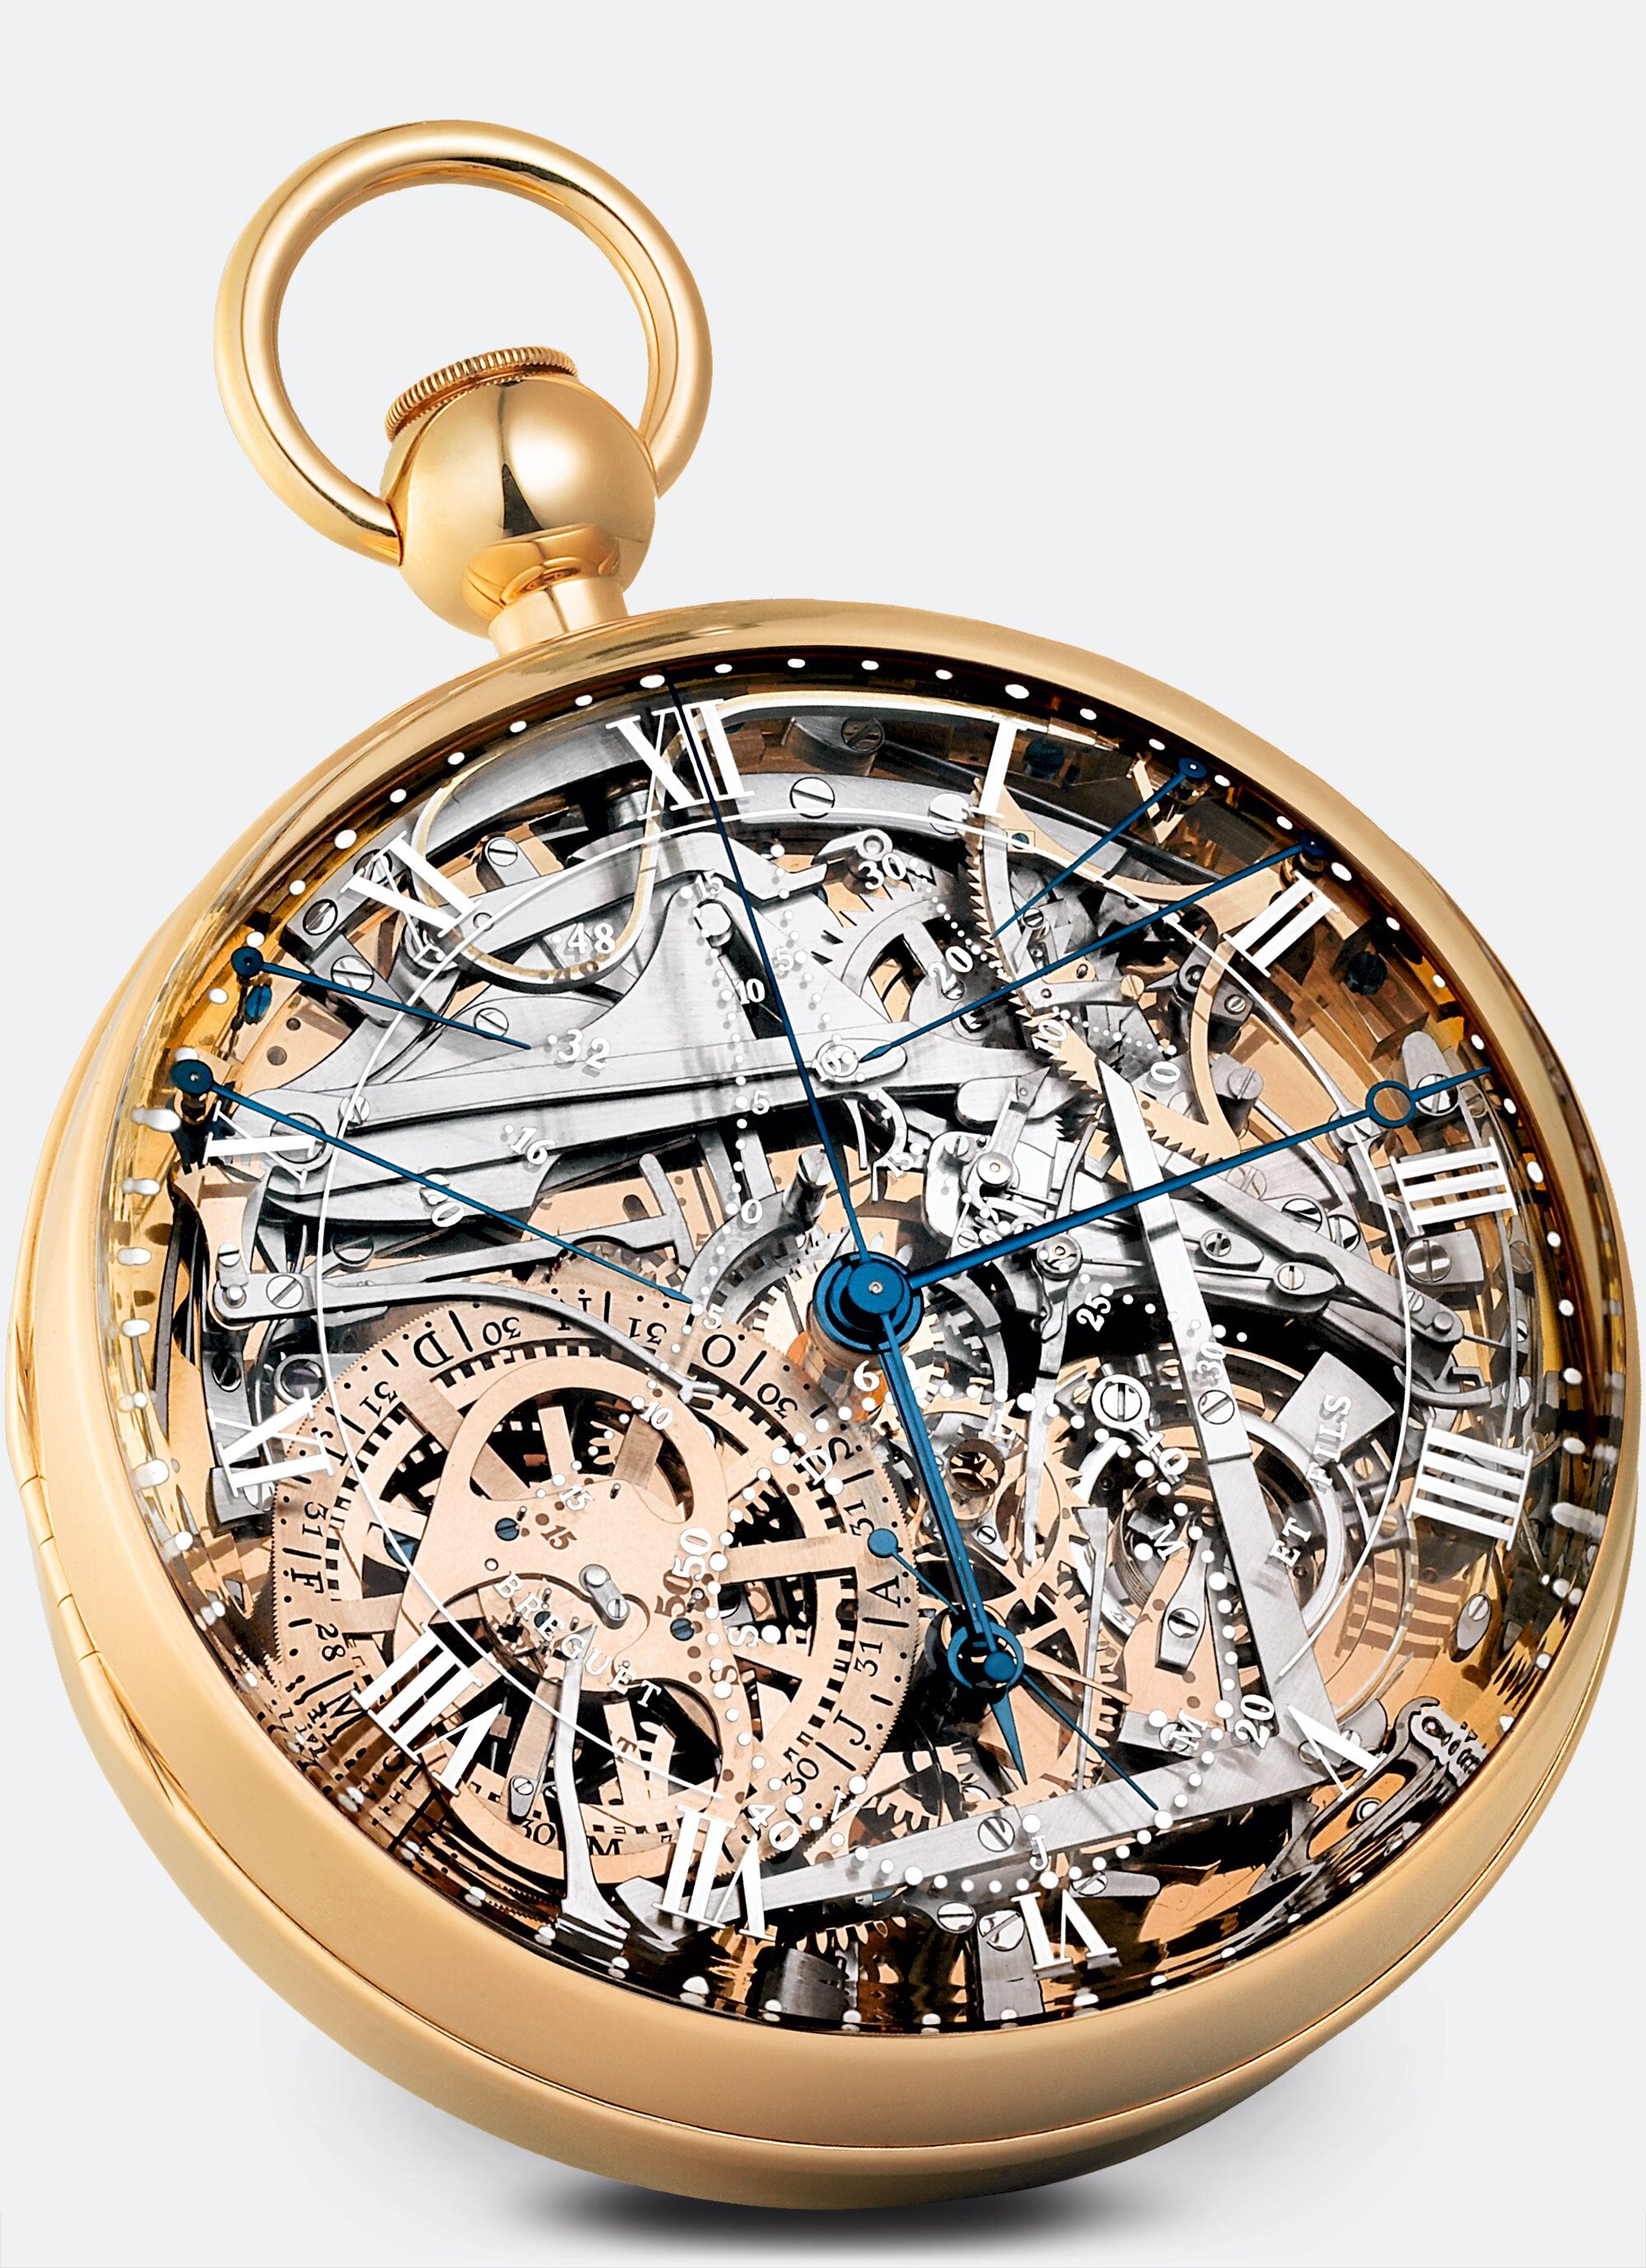 Breguet – The House of Innovation and Style